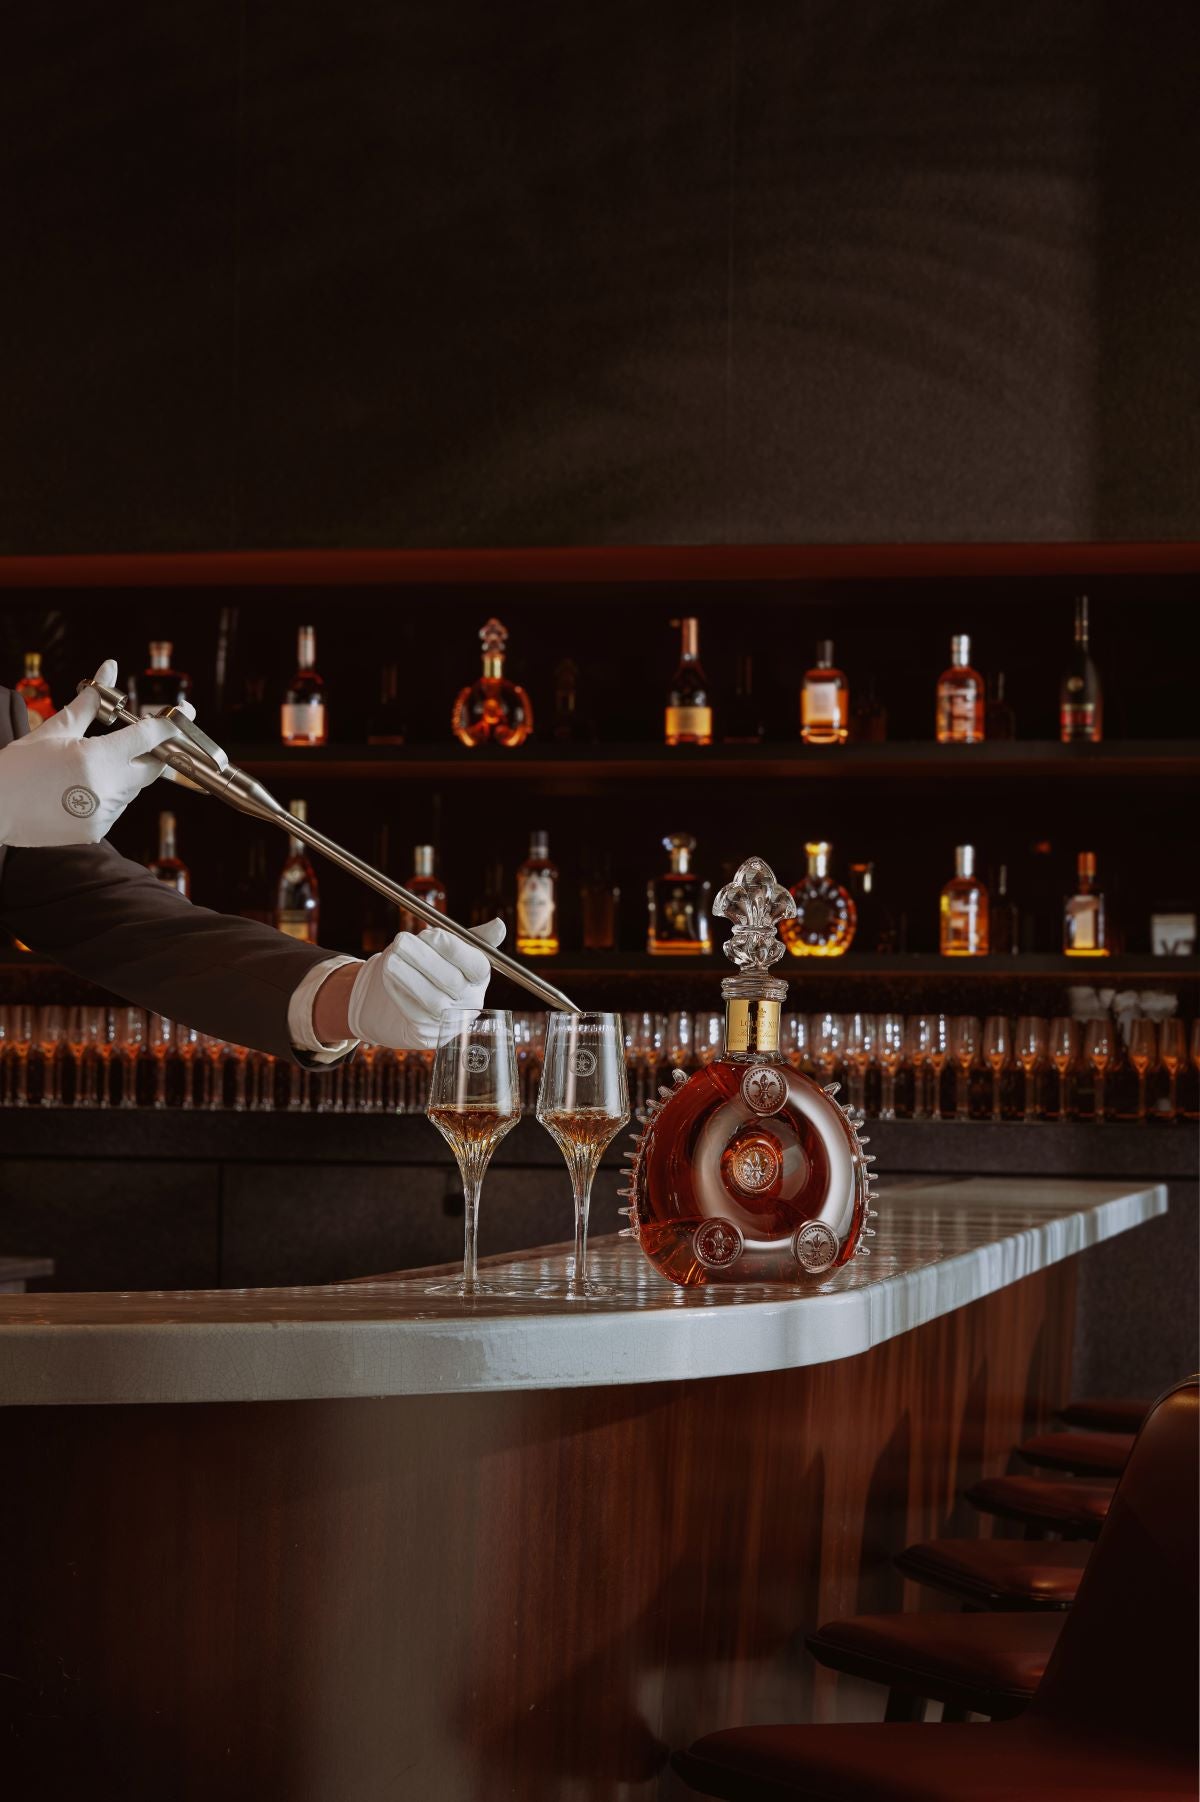 A lifestyle photo of a person with a white glove serving LOUIS XIII cognac to two crystal glasses with a spear